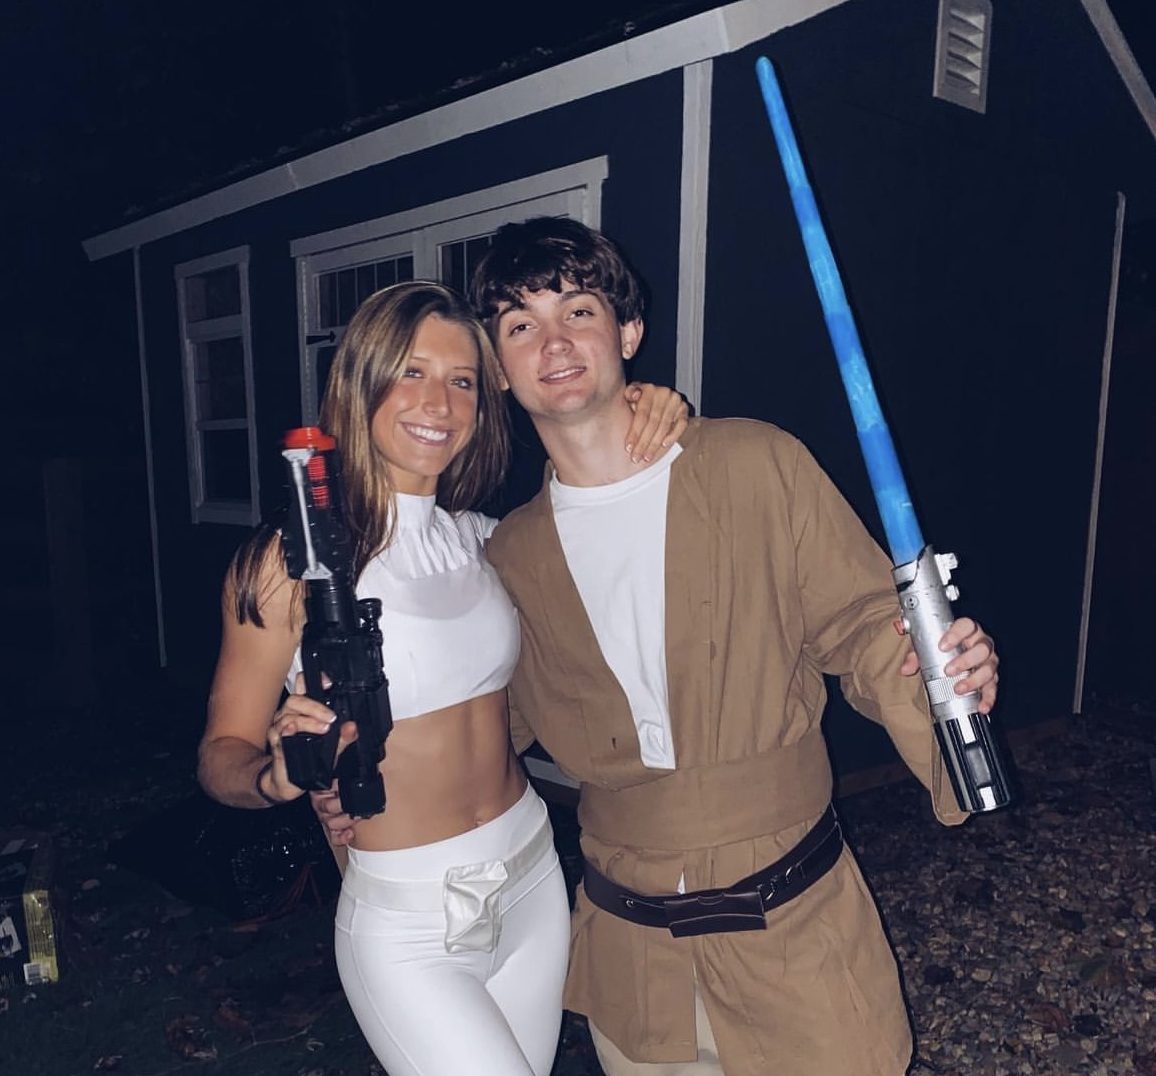 Cuffing Season Means Couples Costumes: Here Are Some Frighteningly Good ...